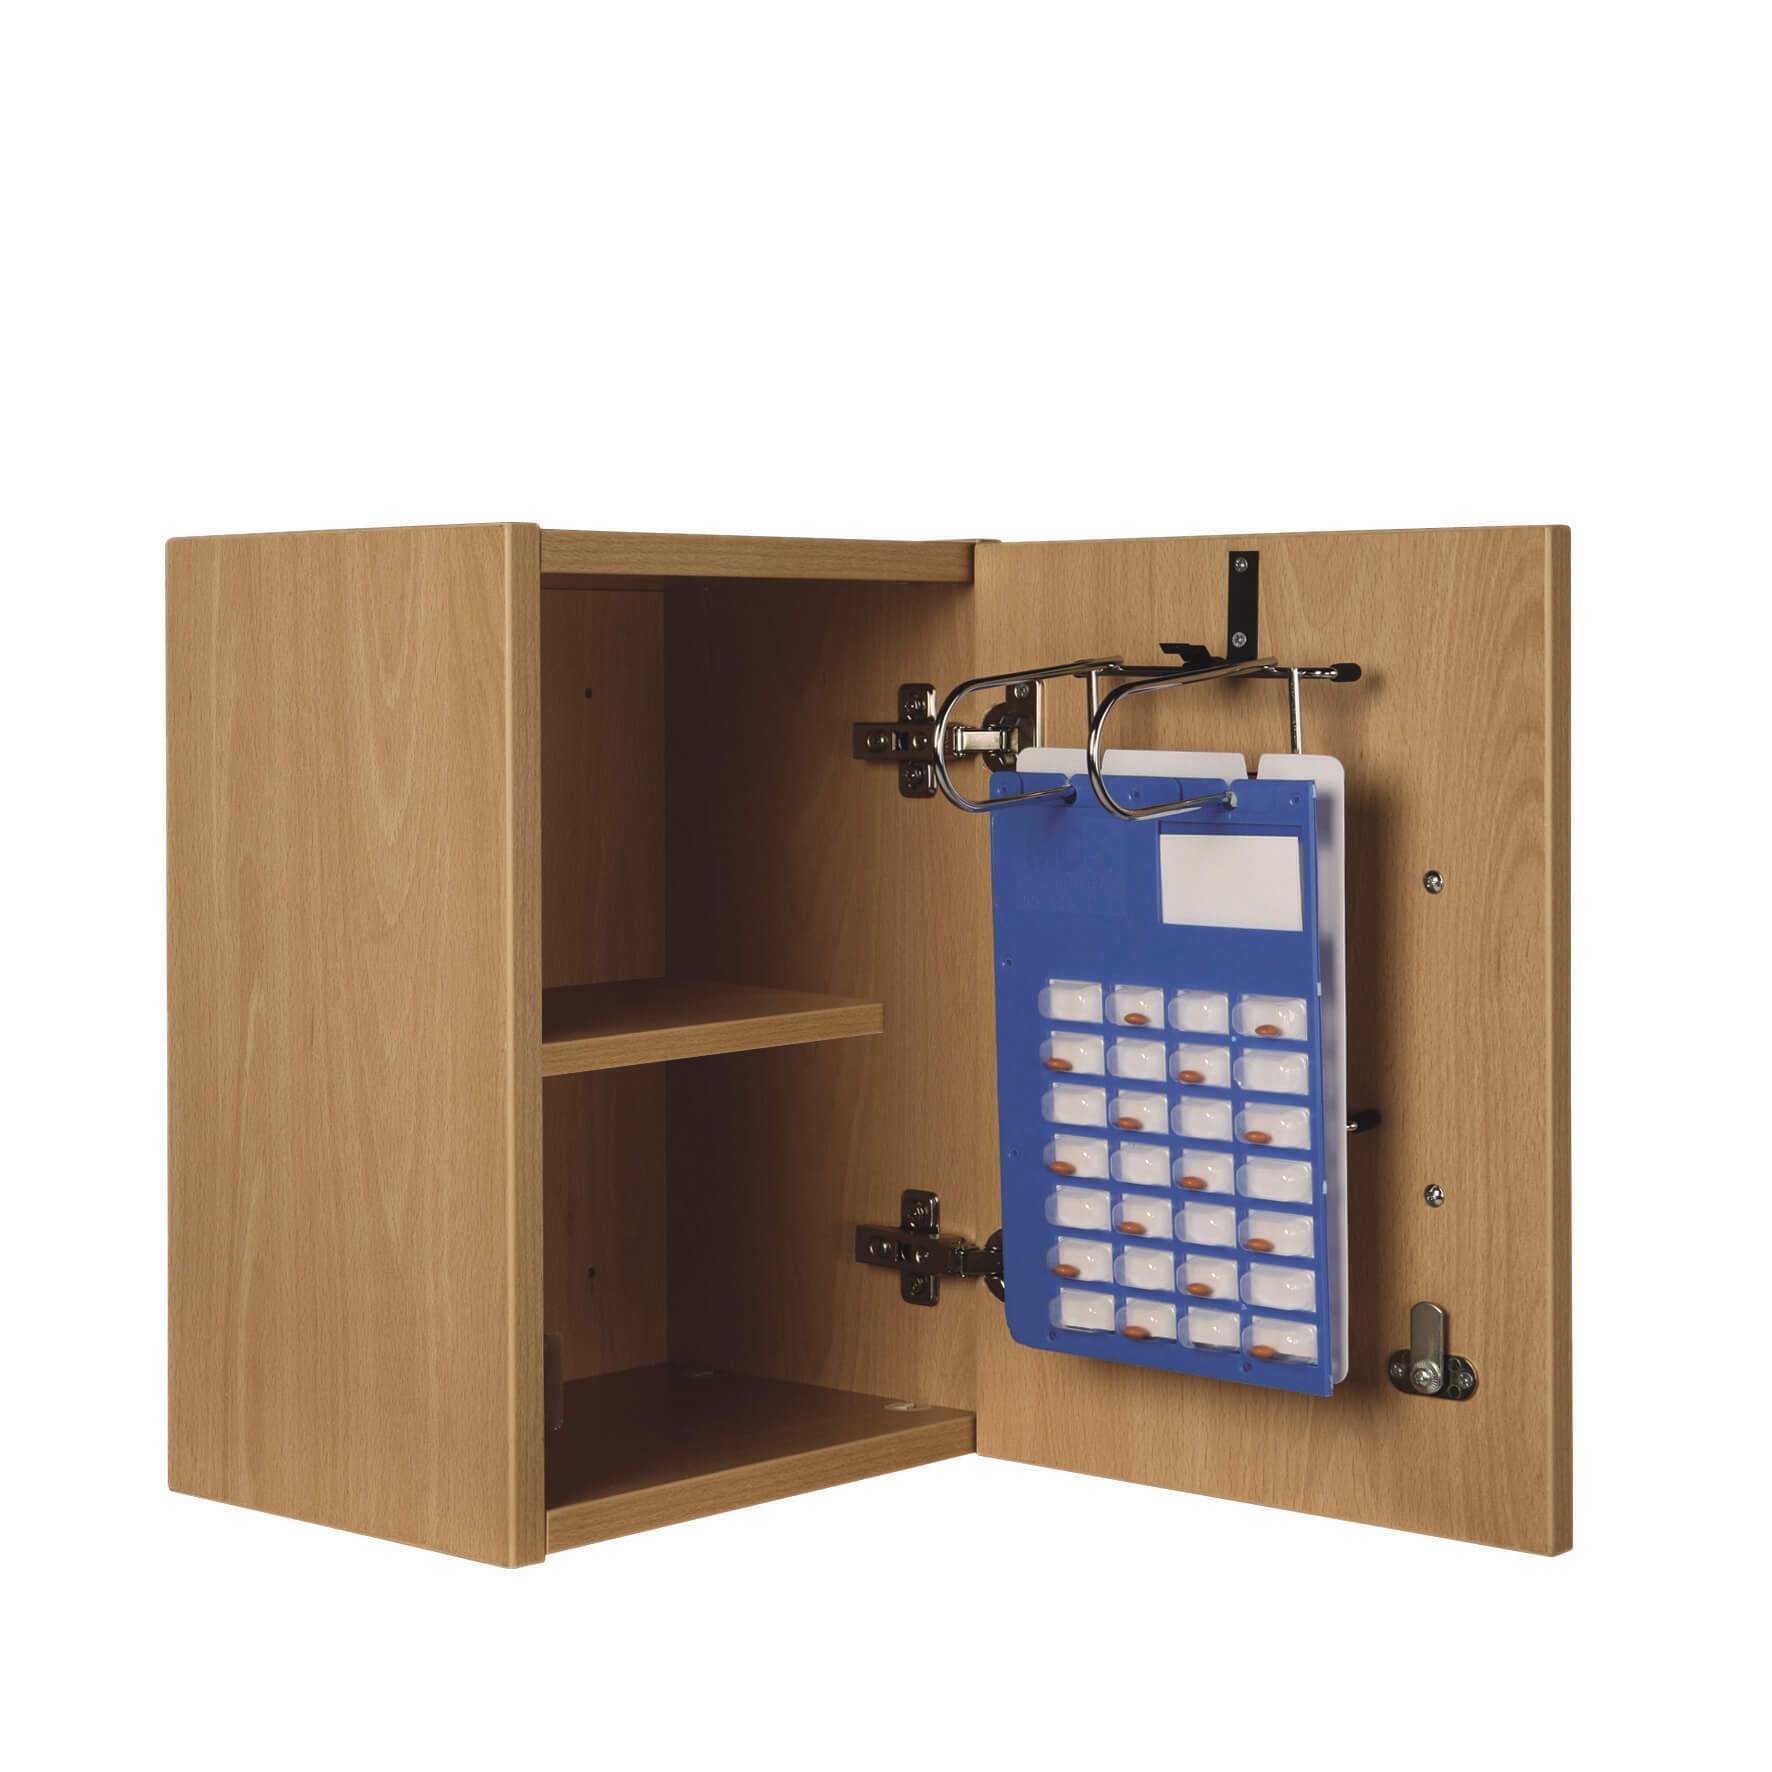 Self Administration Cabinets